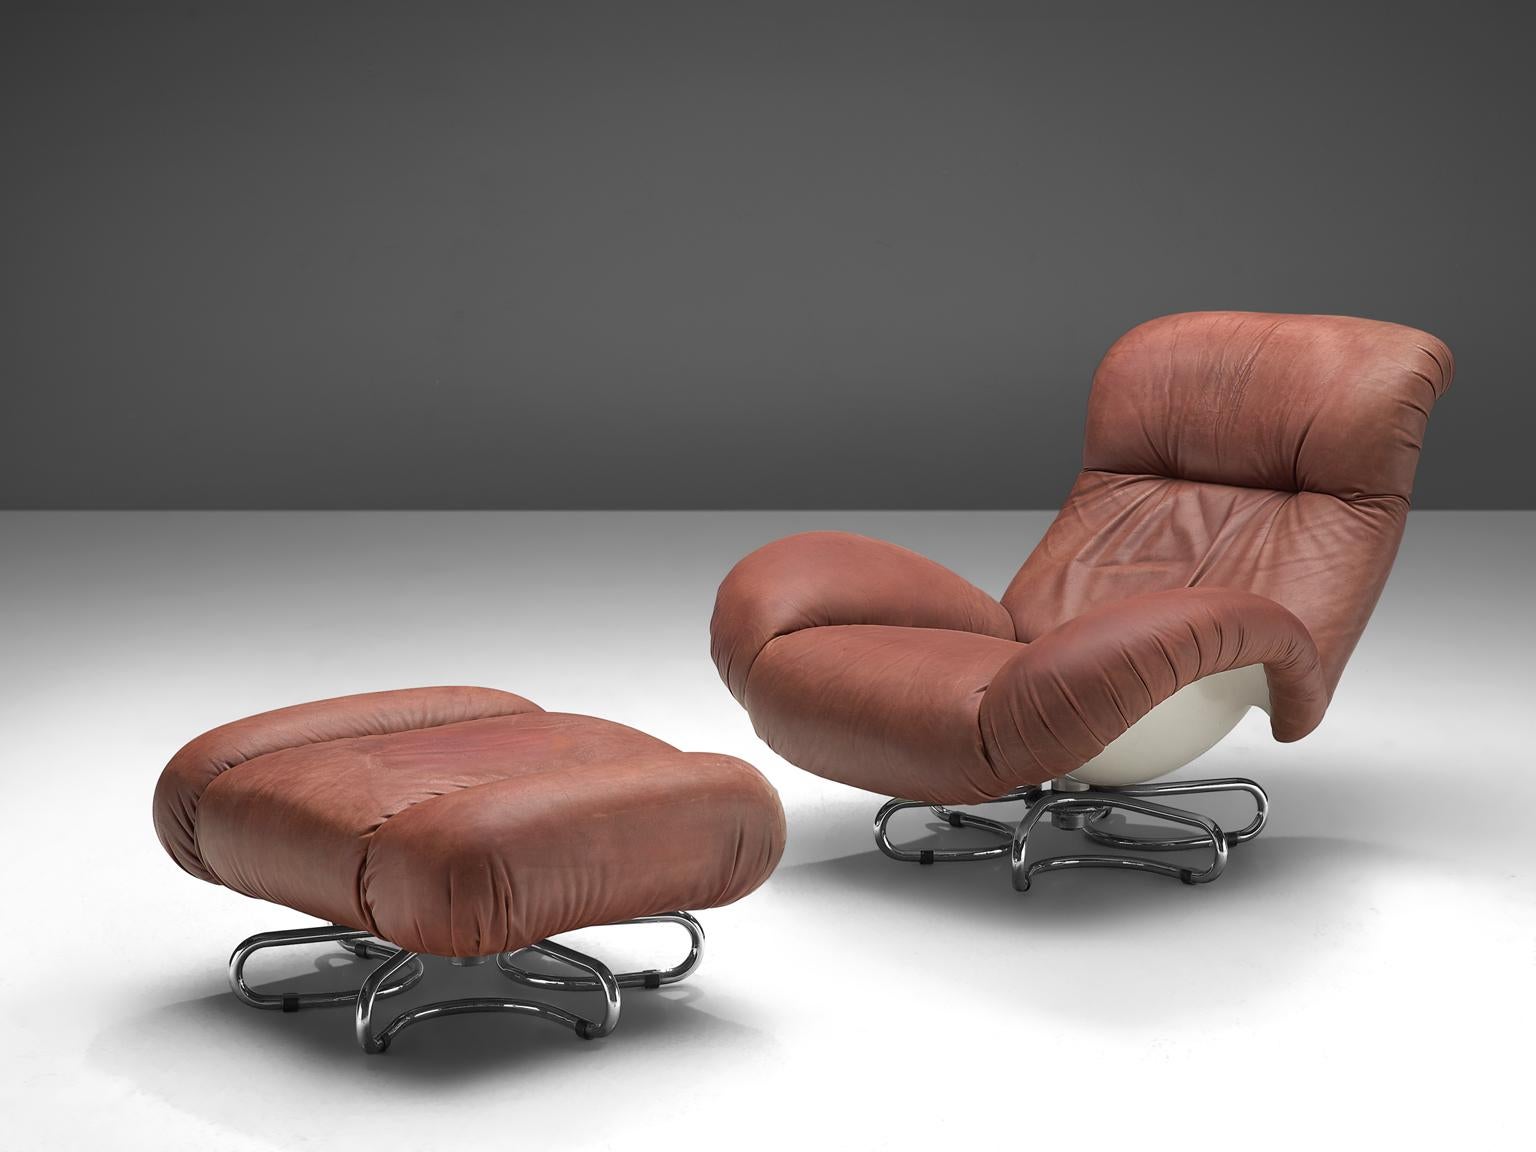 Bruno Gecchelin for Busnelli lounge chair and ottoman in leather, fiberglass and chromed metal, Italy, 1972.

This great, rare lounge chair with matching ottoman designed in 1972 by Bruno Gecchelin for Busnelli, comes in its original red leather